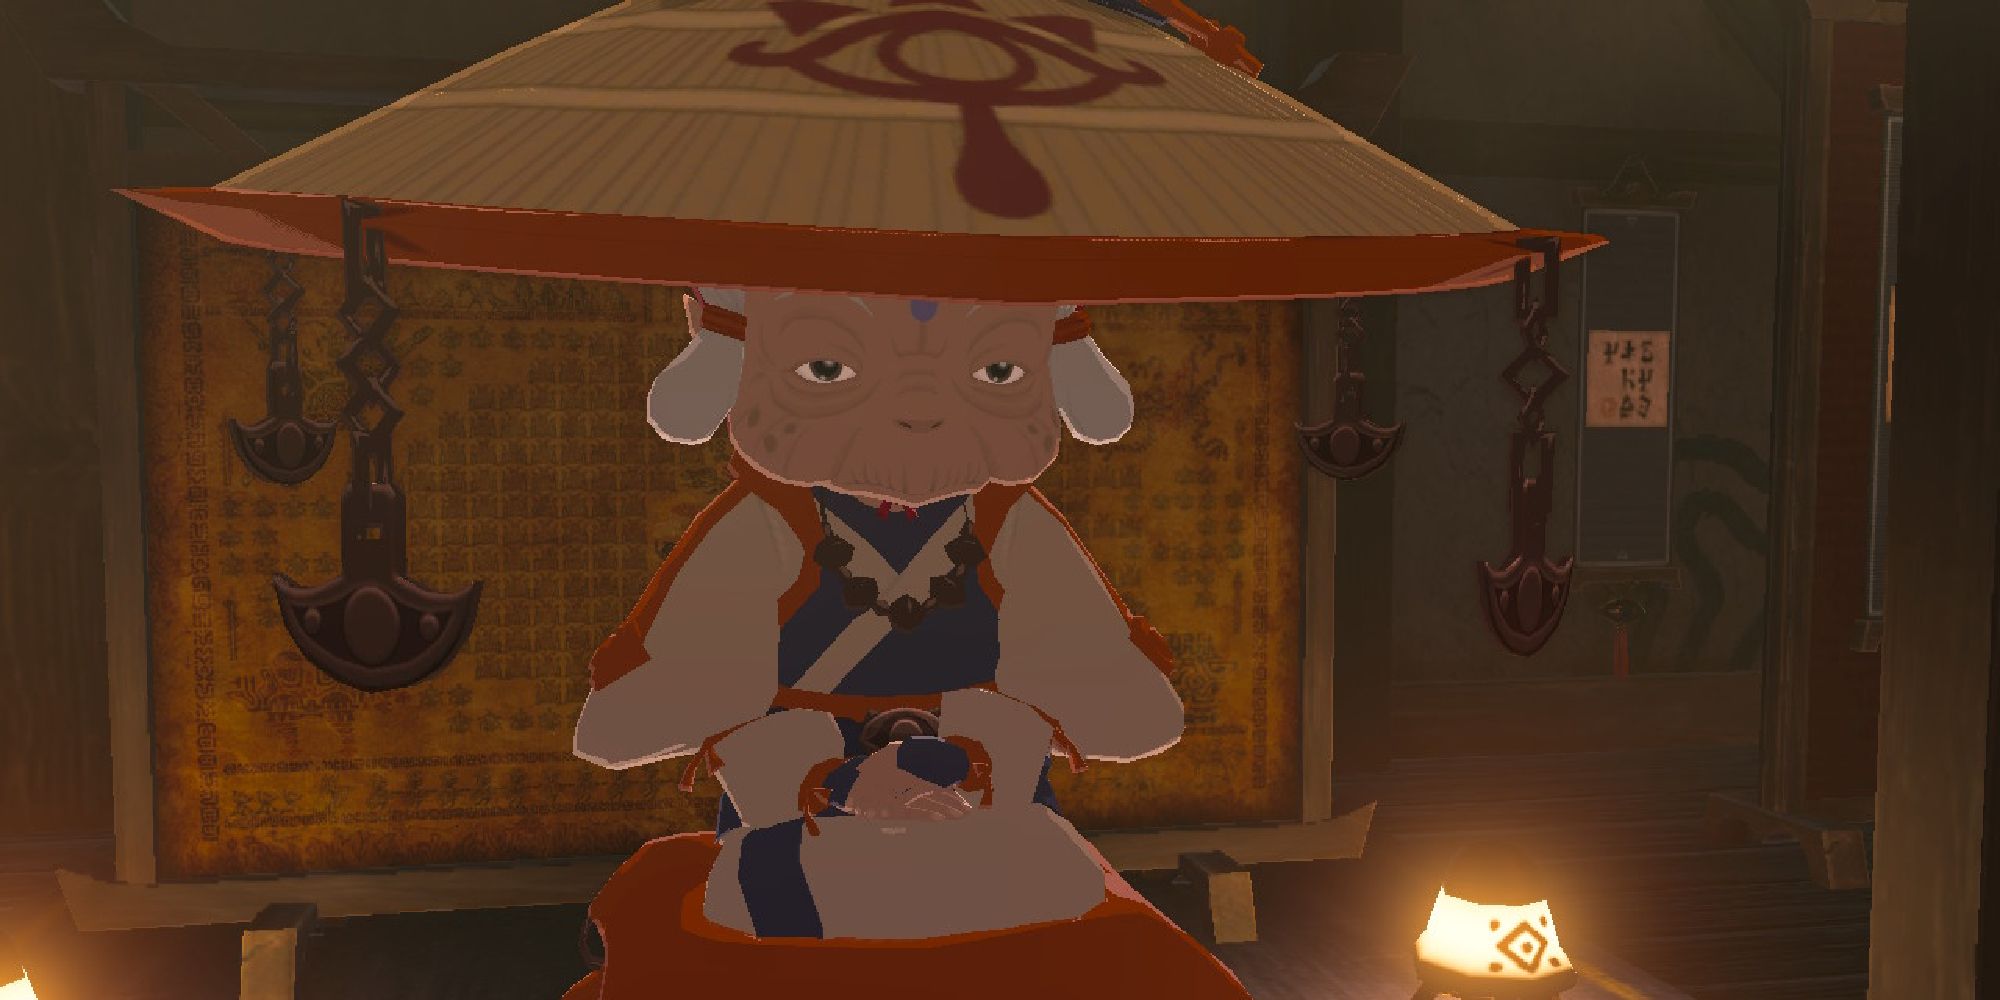 Impa in her home in Breath of the Wild